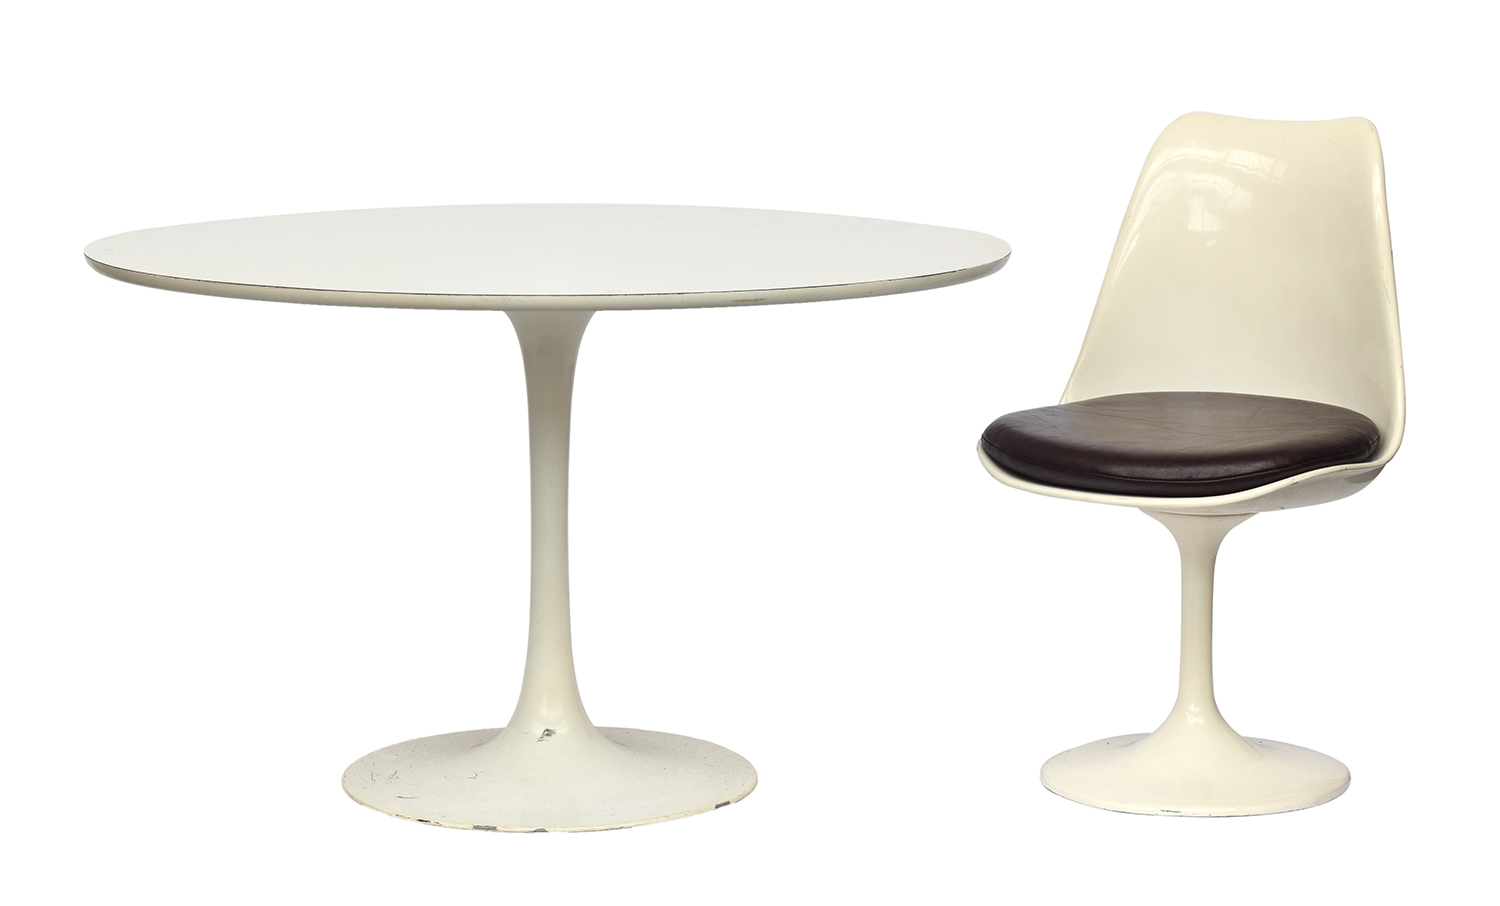 A white Knoll Eero Saarinen 'Tulip' style circular dining table with white formica top, 121cm